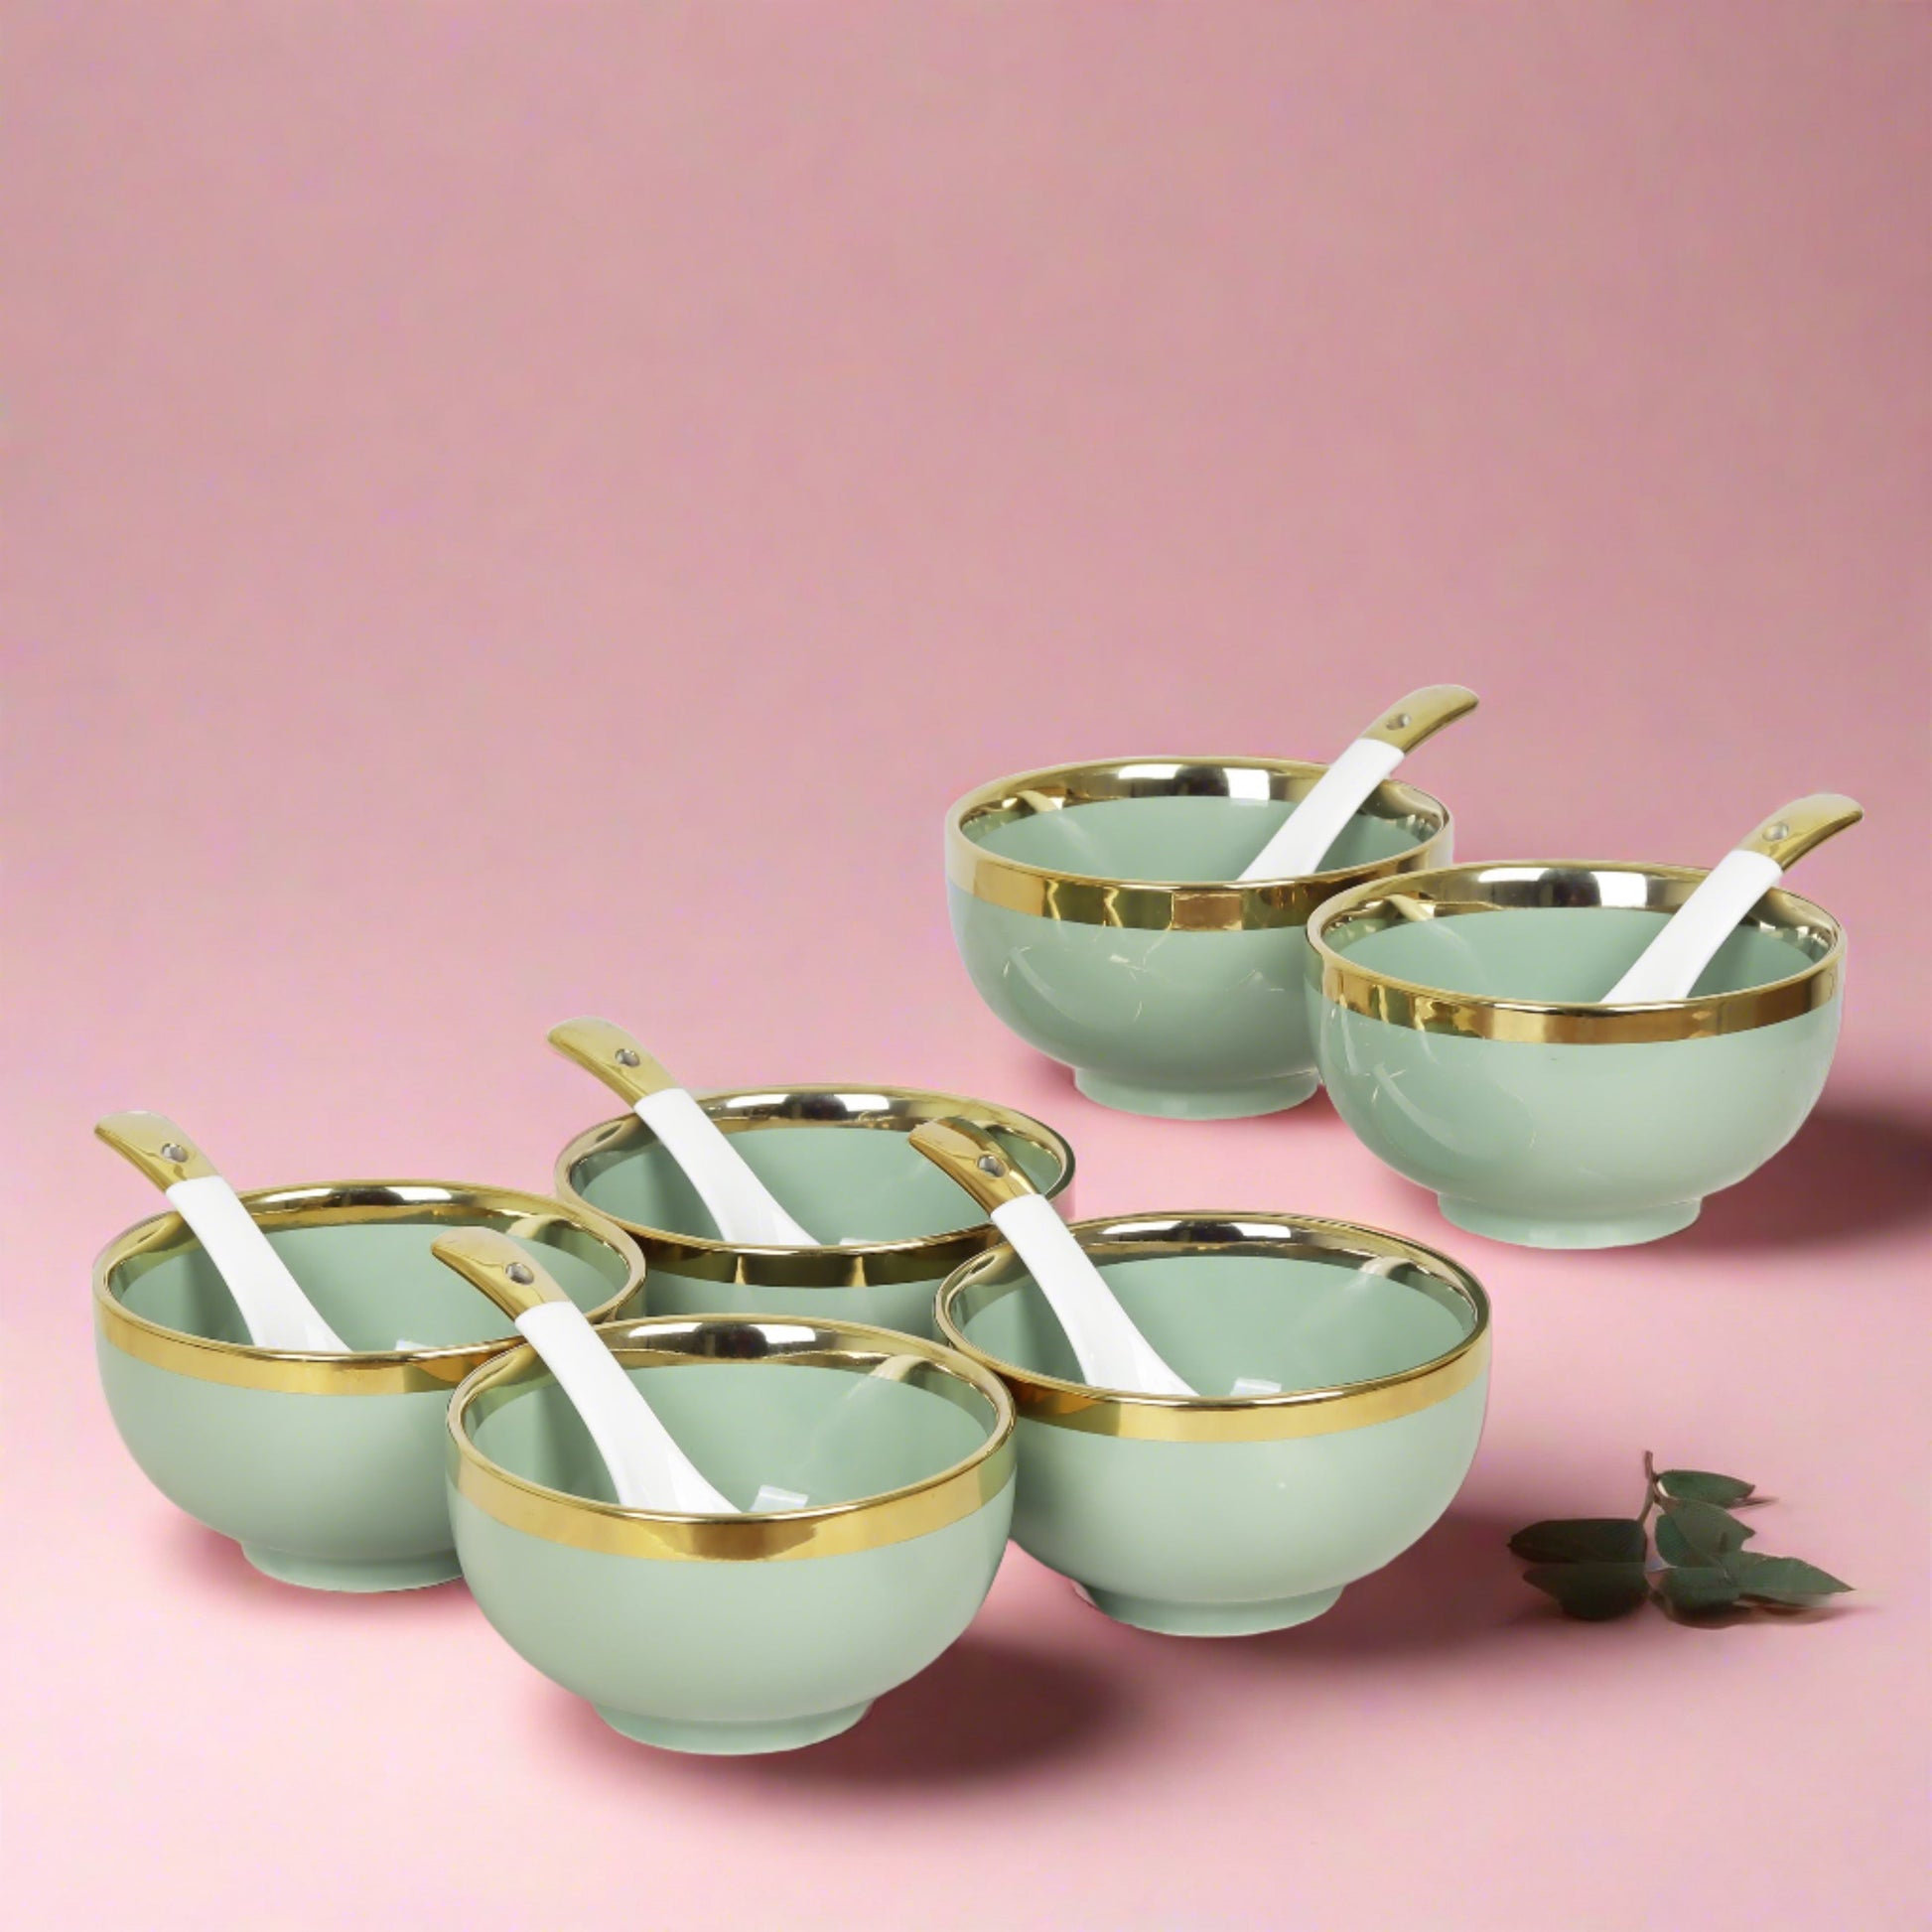 Set of 6 ceramic soup bowls with matching spoons - perfect for delightful soup servings